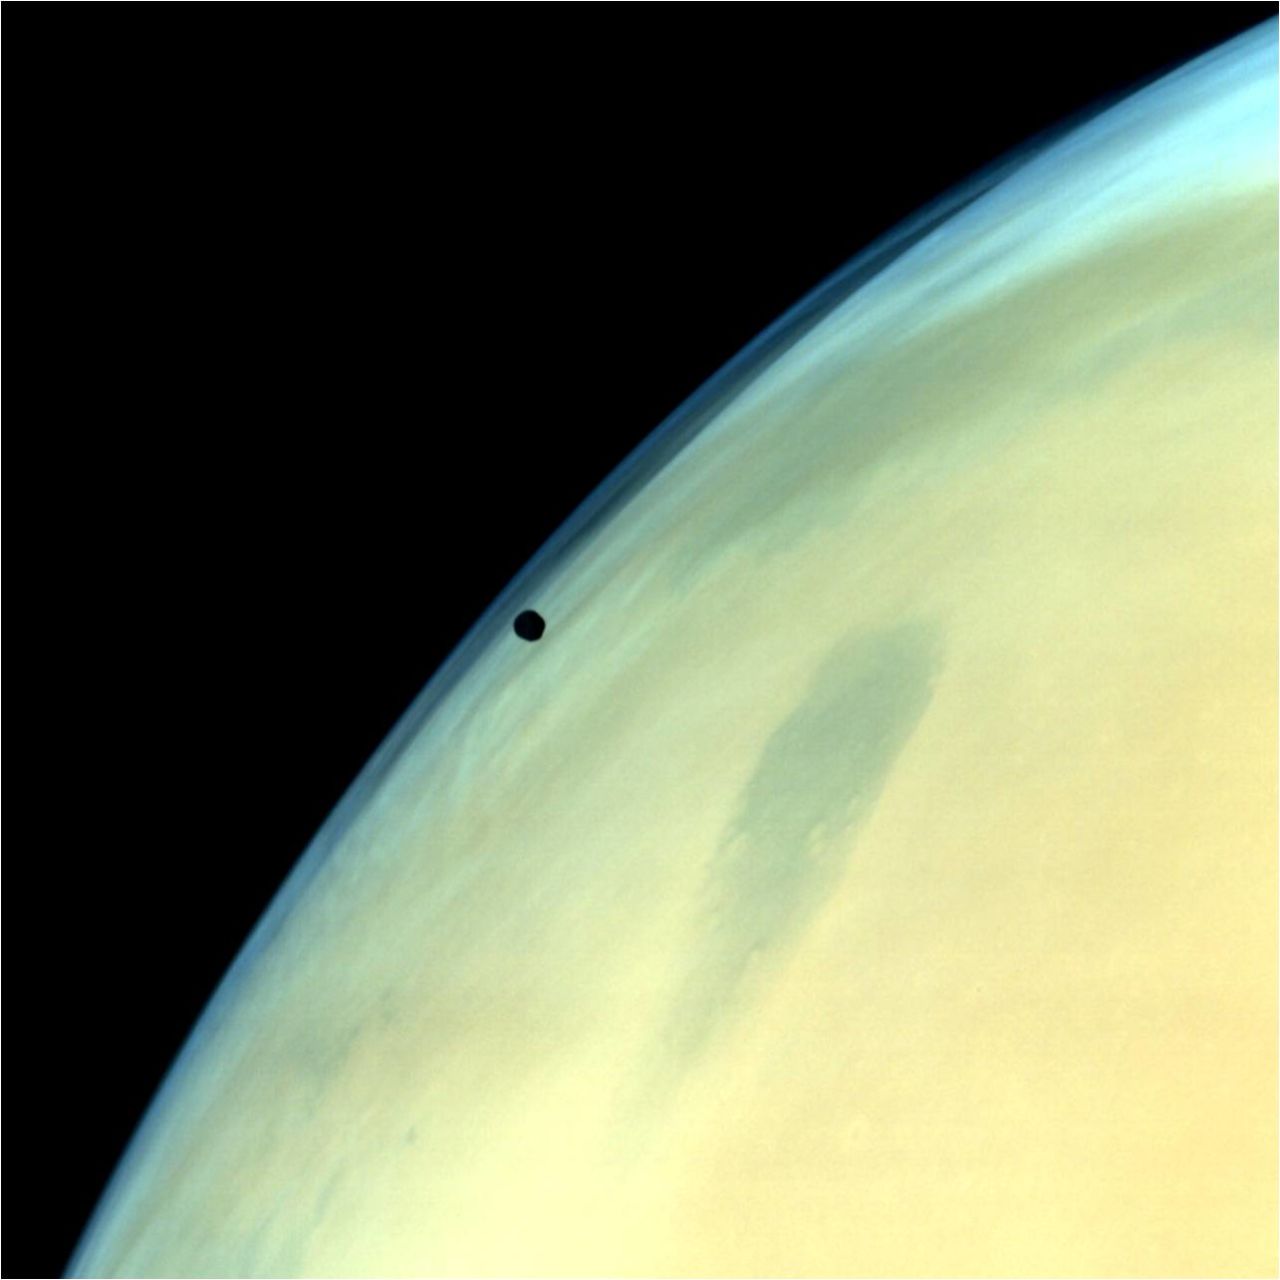 Phobos, one of the two natural satellites of Mars, silhouetted against the Martian surface.